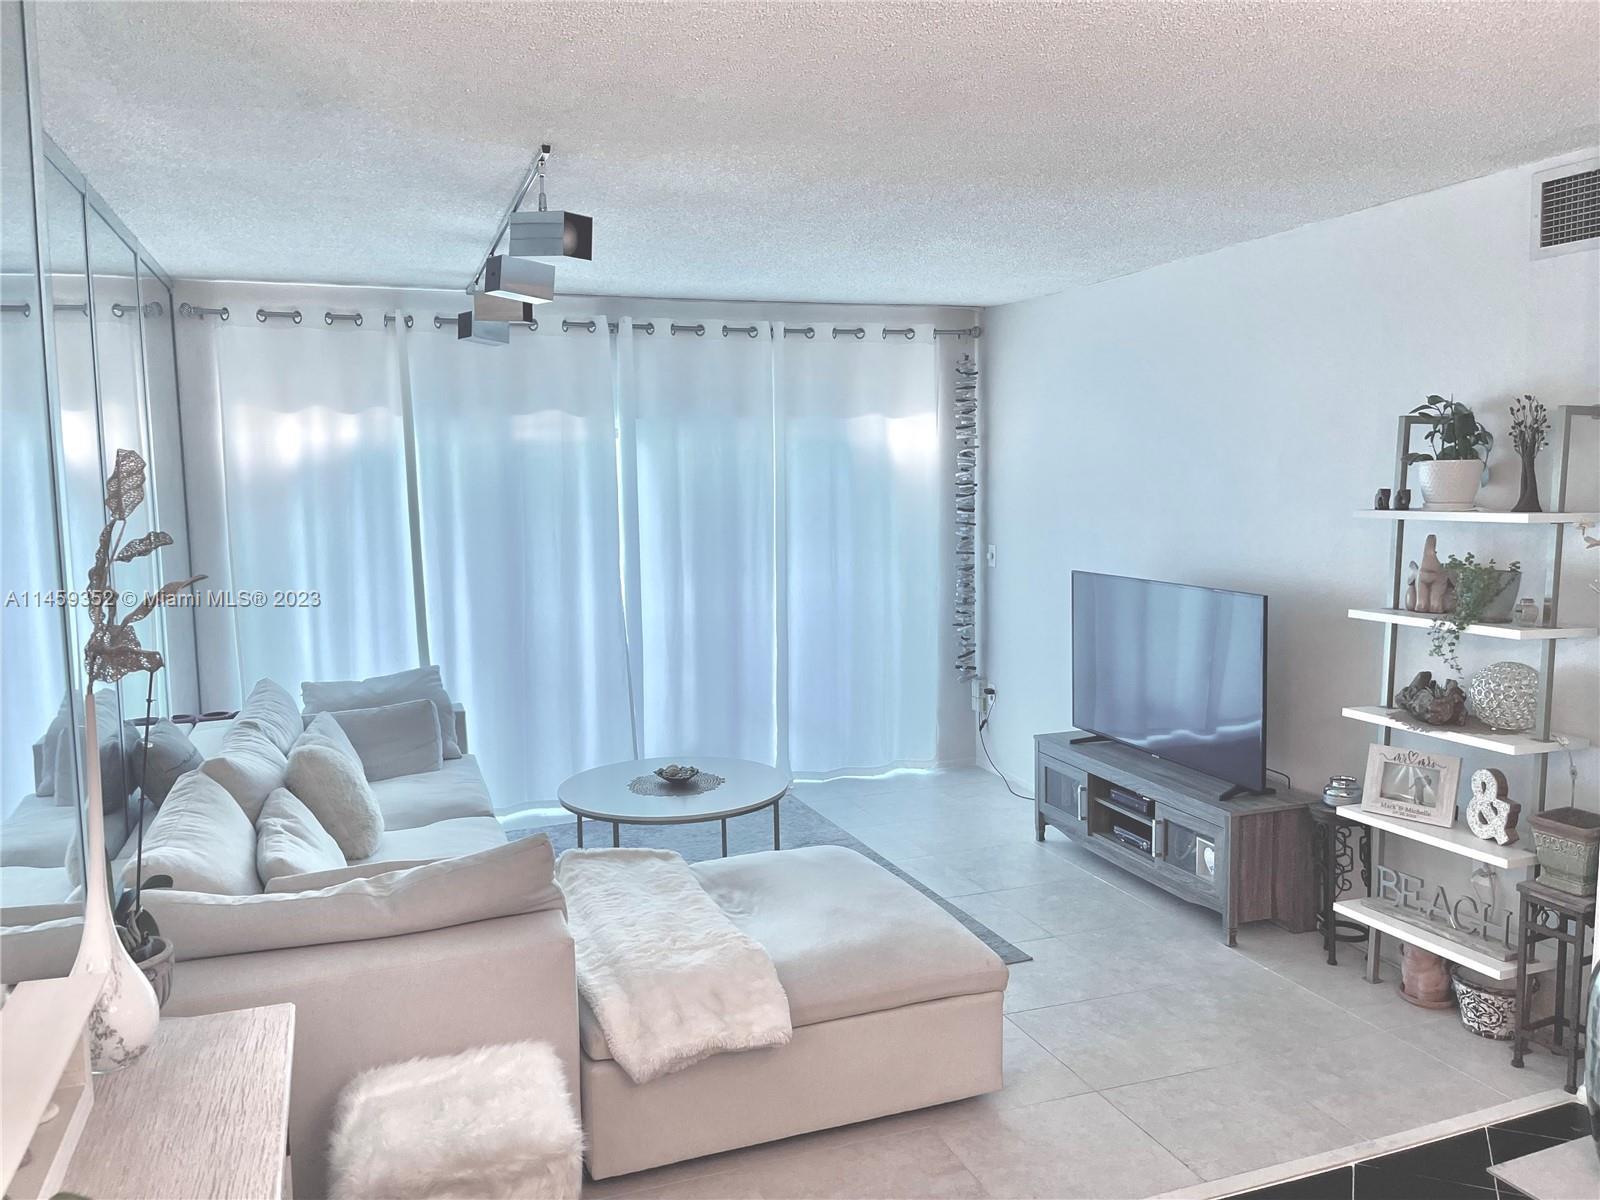 Enjoy one of the best luxurious high-rise oceanfront bldgs in Hallandale & enjoy the resort lifestyl